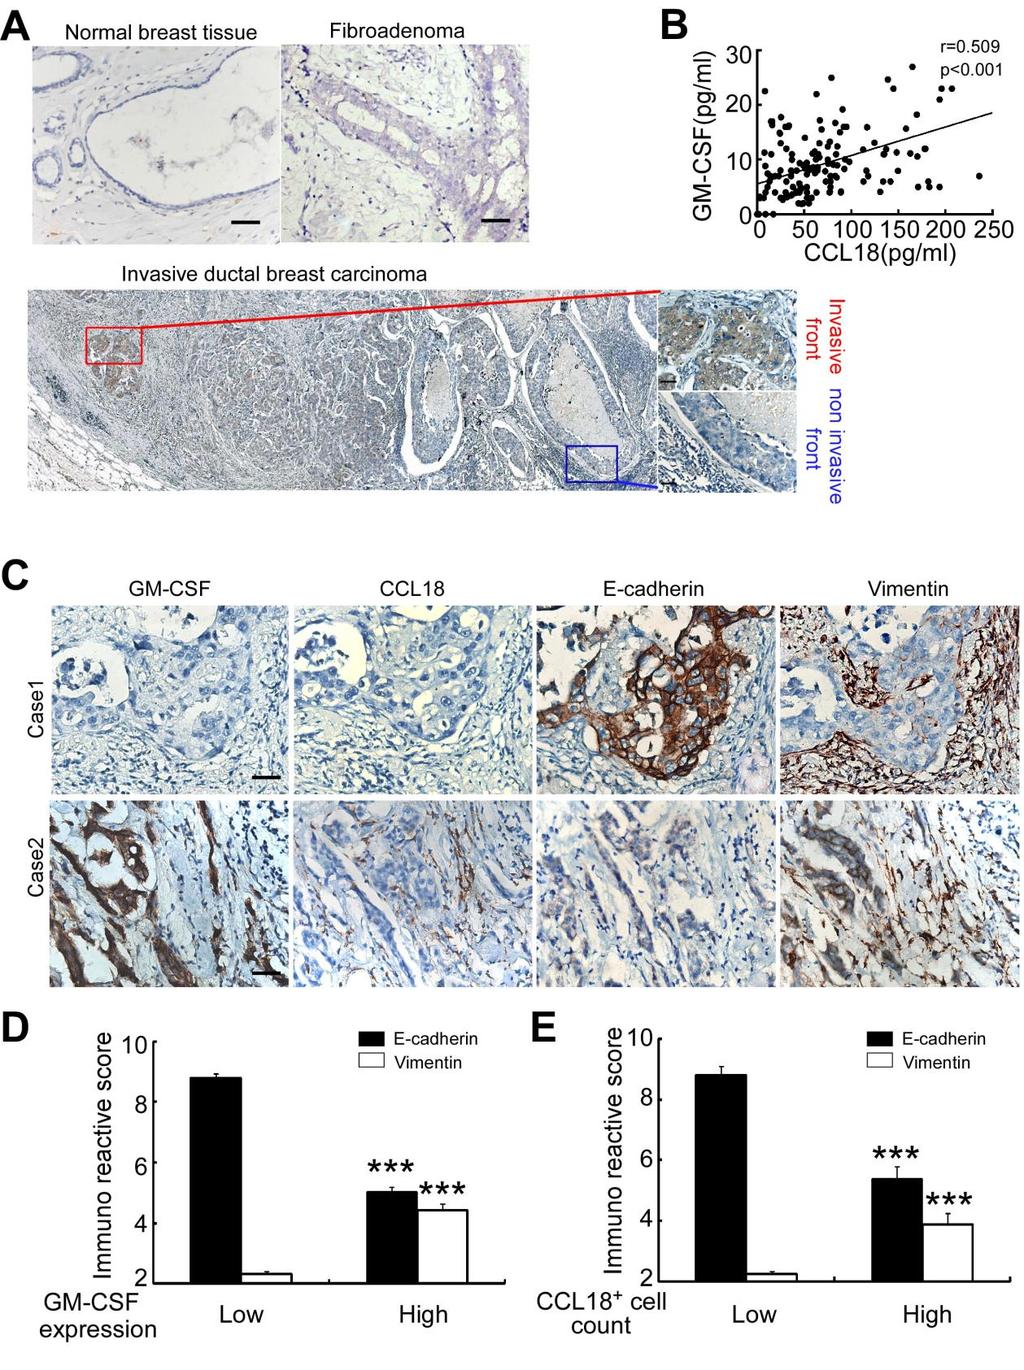 Figure S7, related to Figure 7 The GM-CSF and CCL18 loop is associated with metastasis in breast cancer patients.